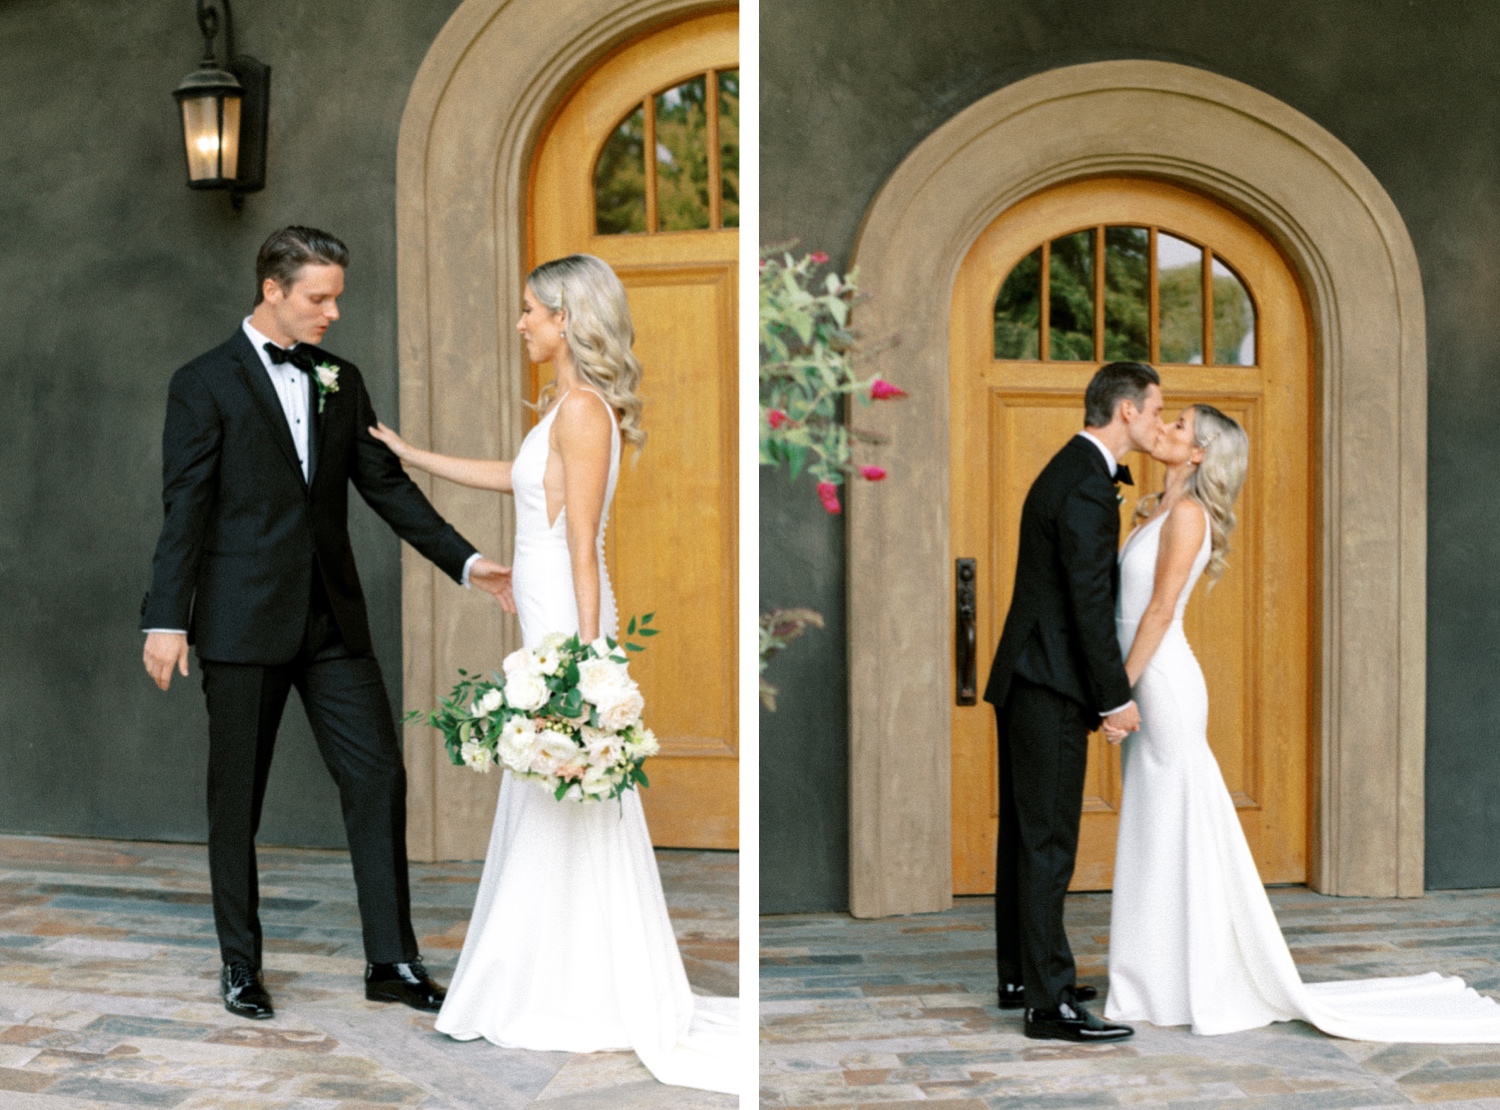 First look at Abeja Winery and Inn Wedding